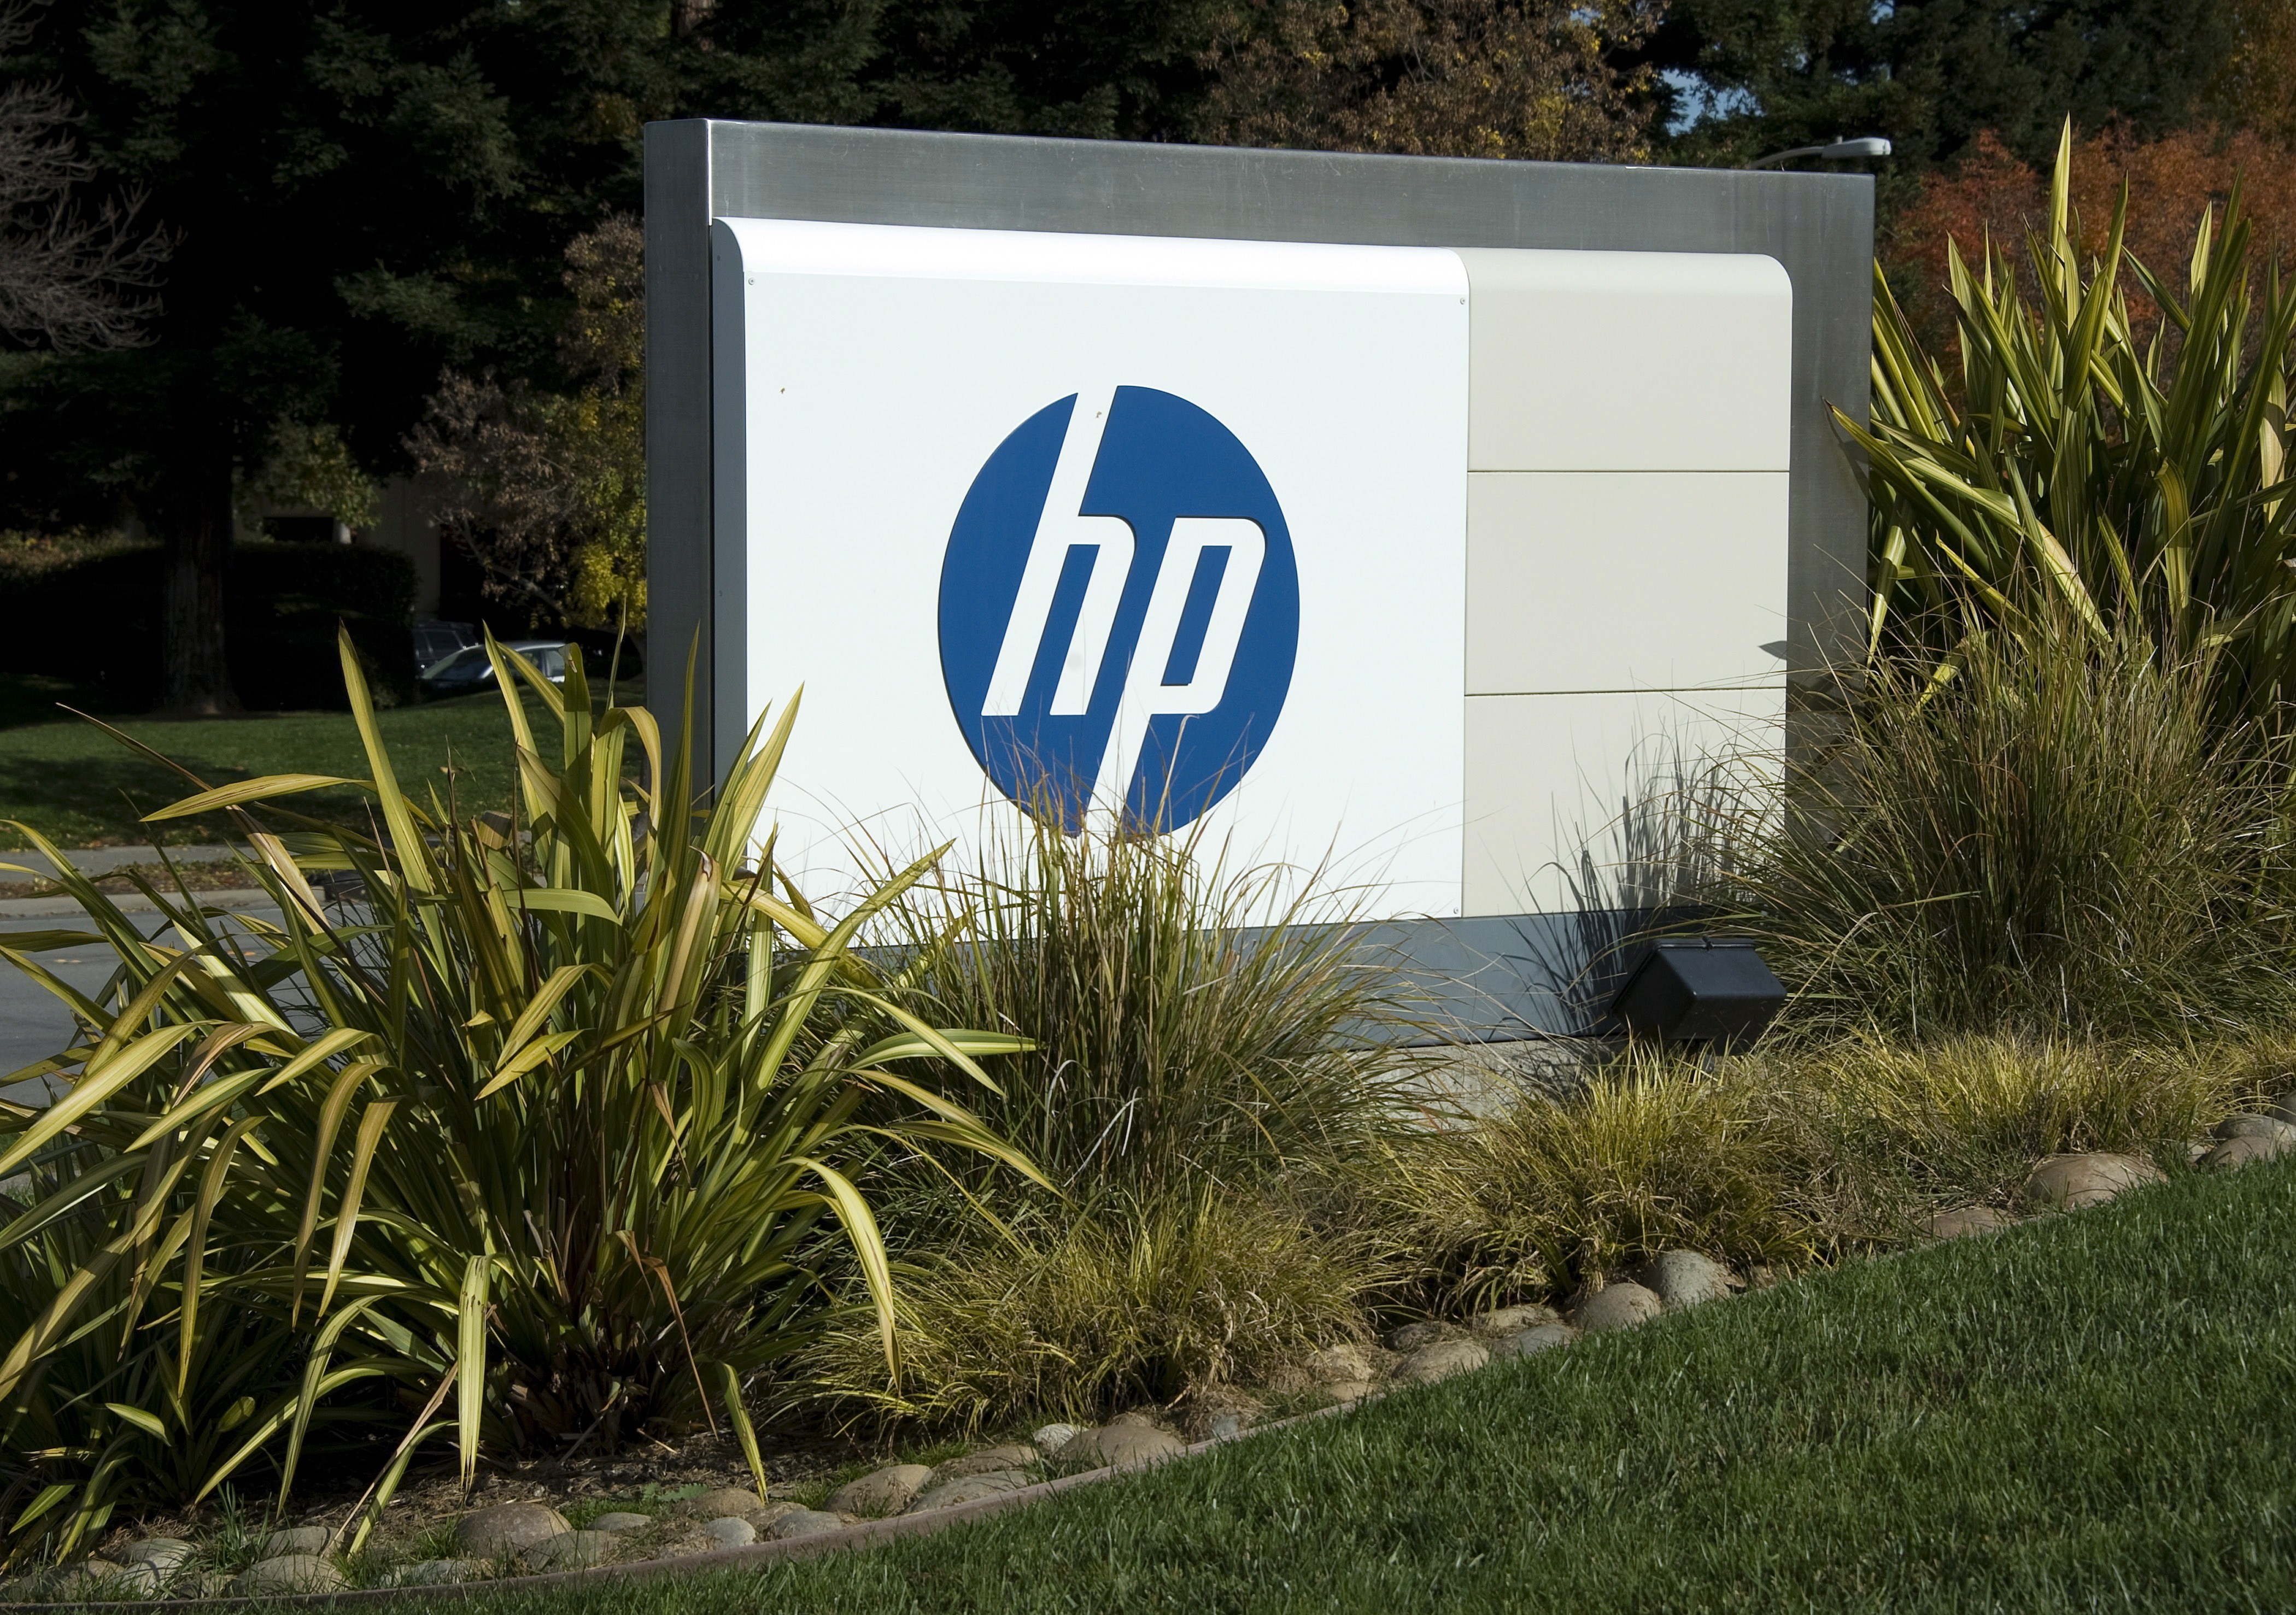 Lynch sold his company to Hewlett Packard in an ill-fated US$11.1 billion deal. Photo: EPA-EFE